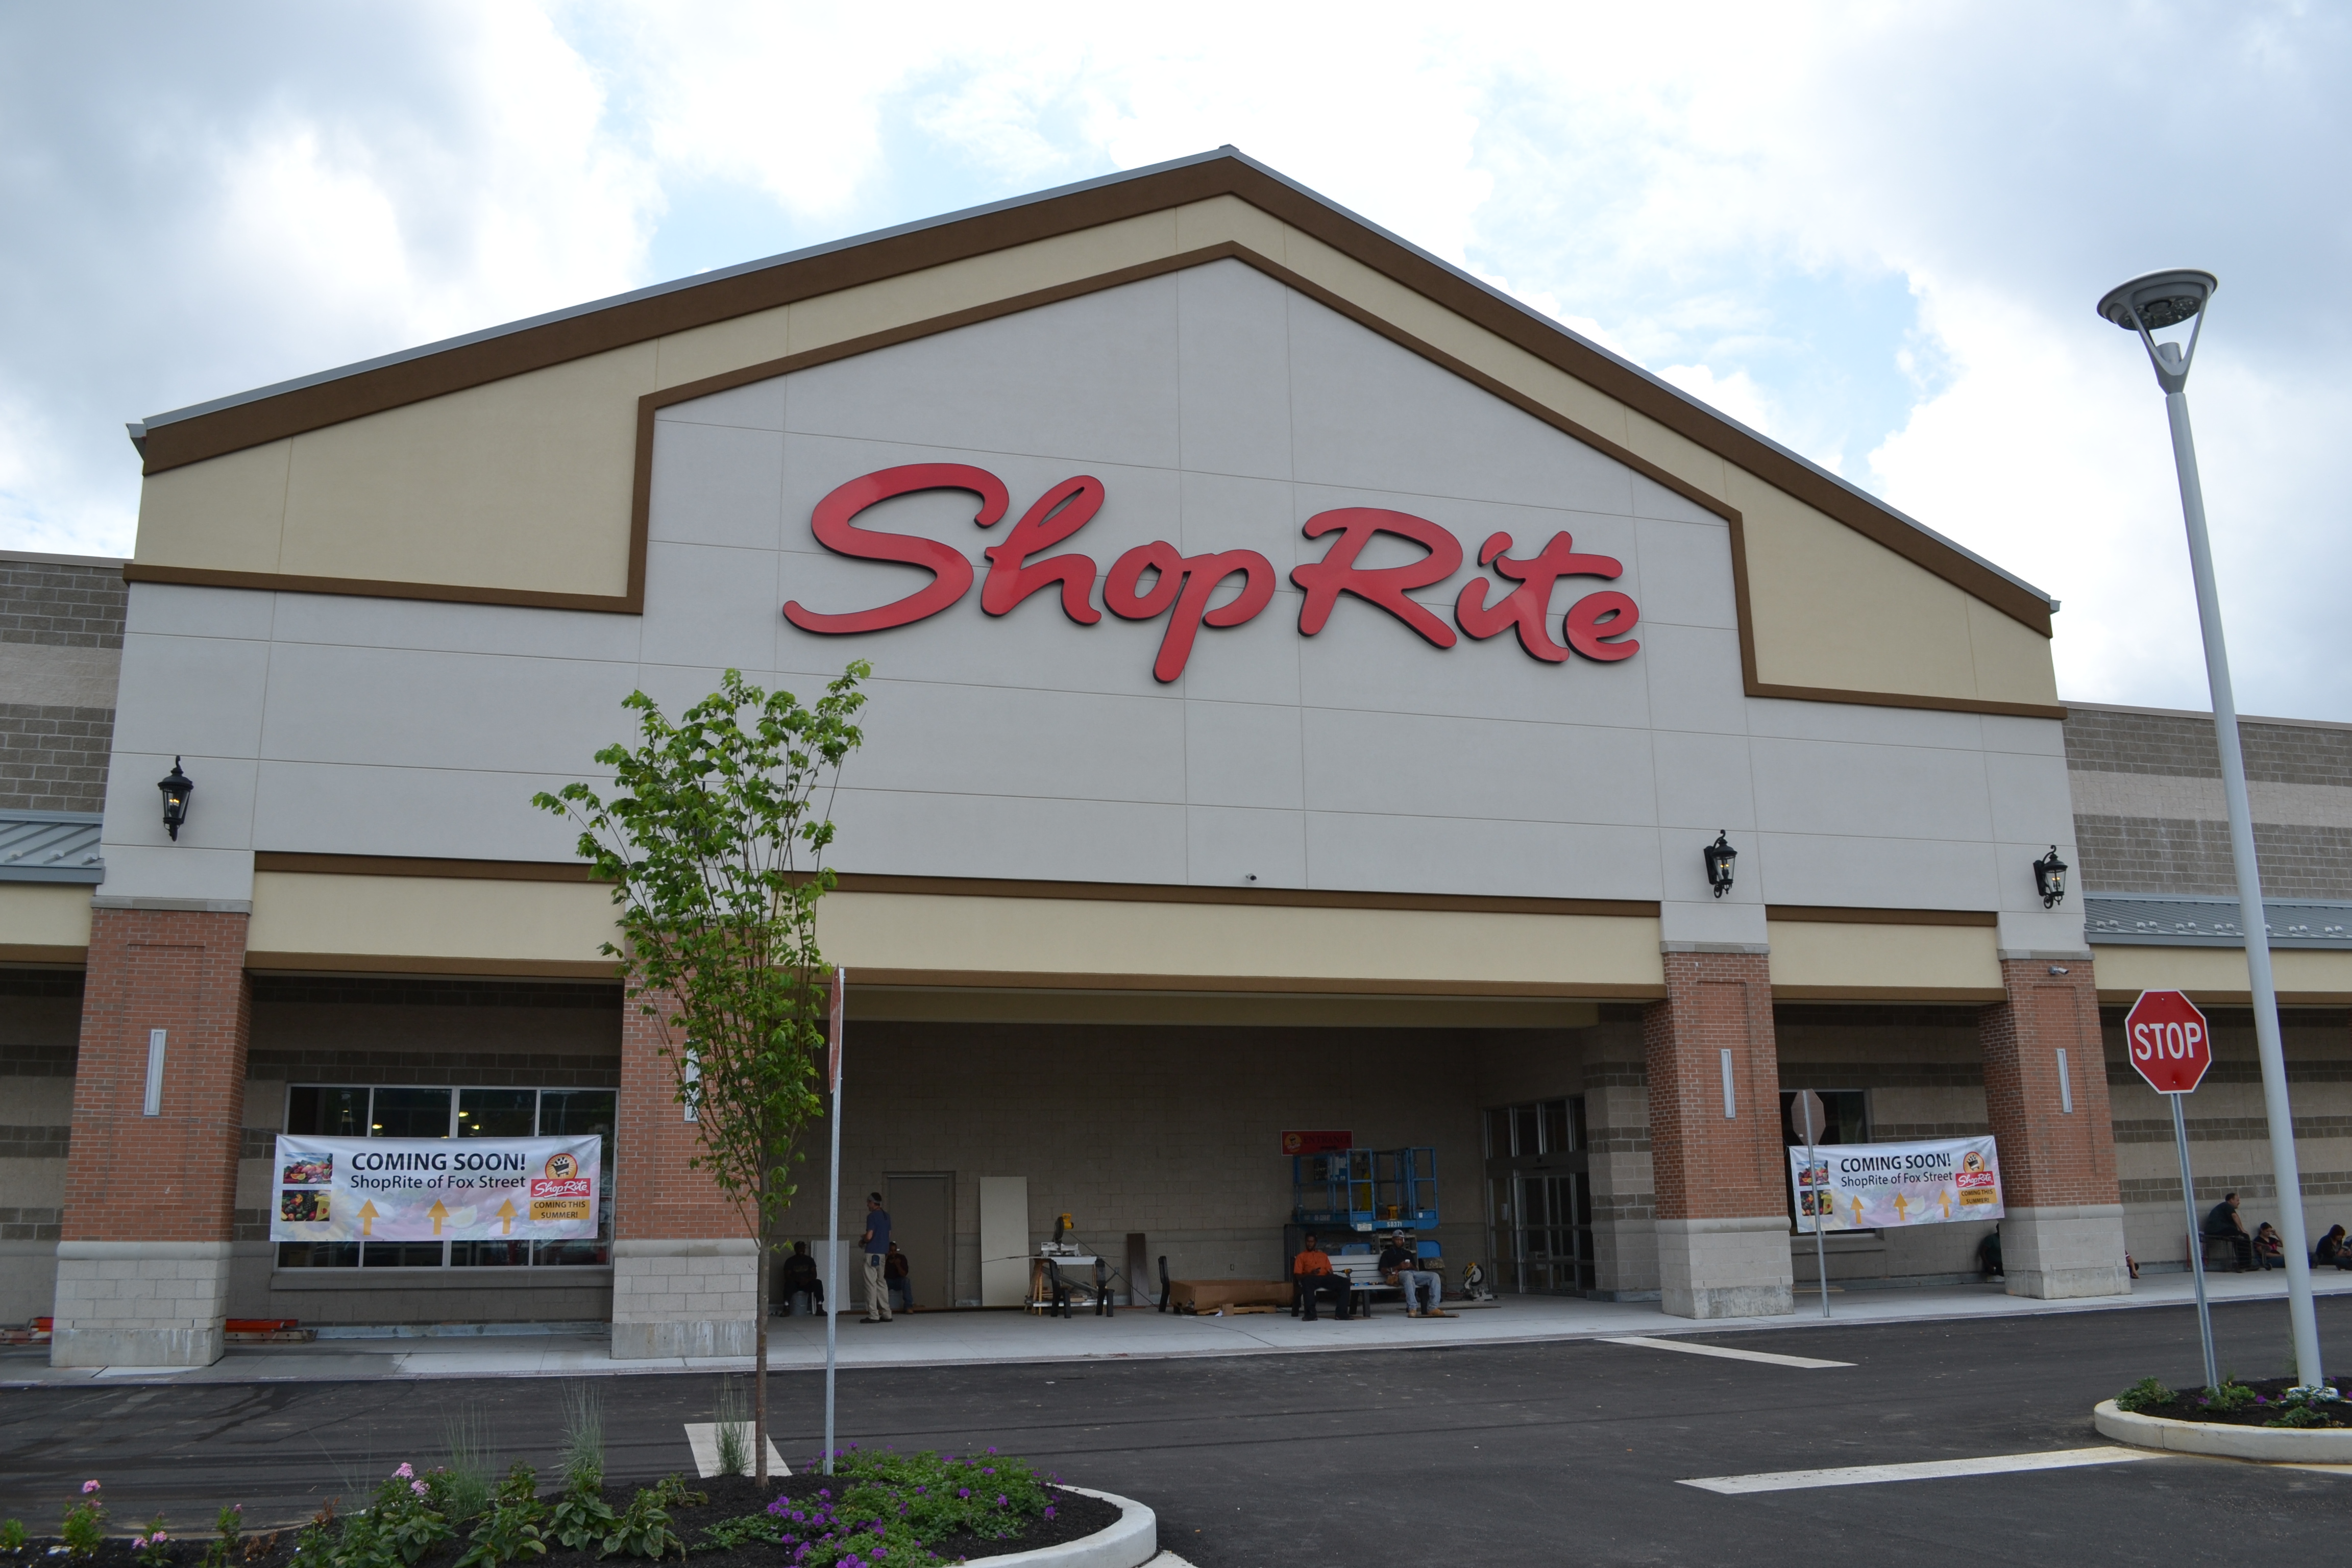 The ShopRite at the heart of Bakers Centre will open August 1